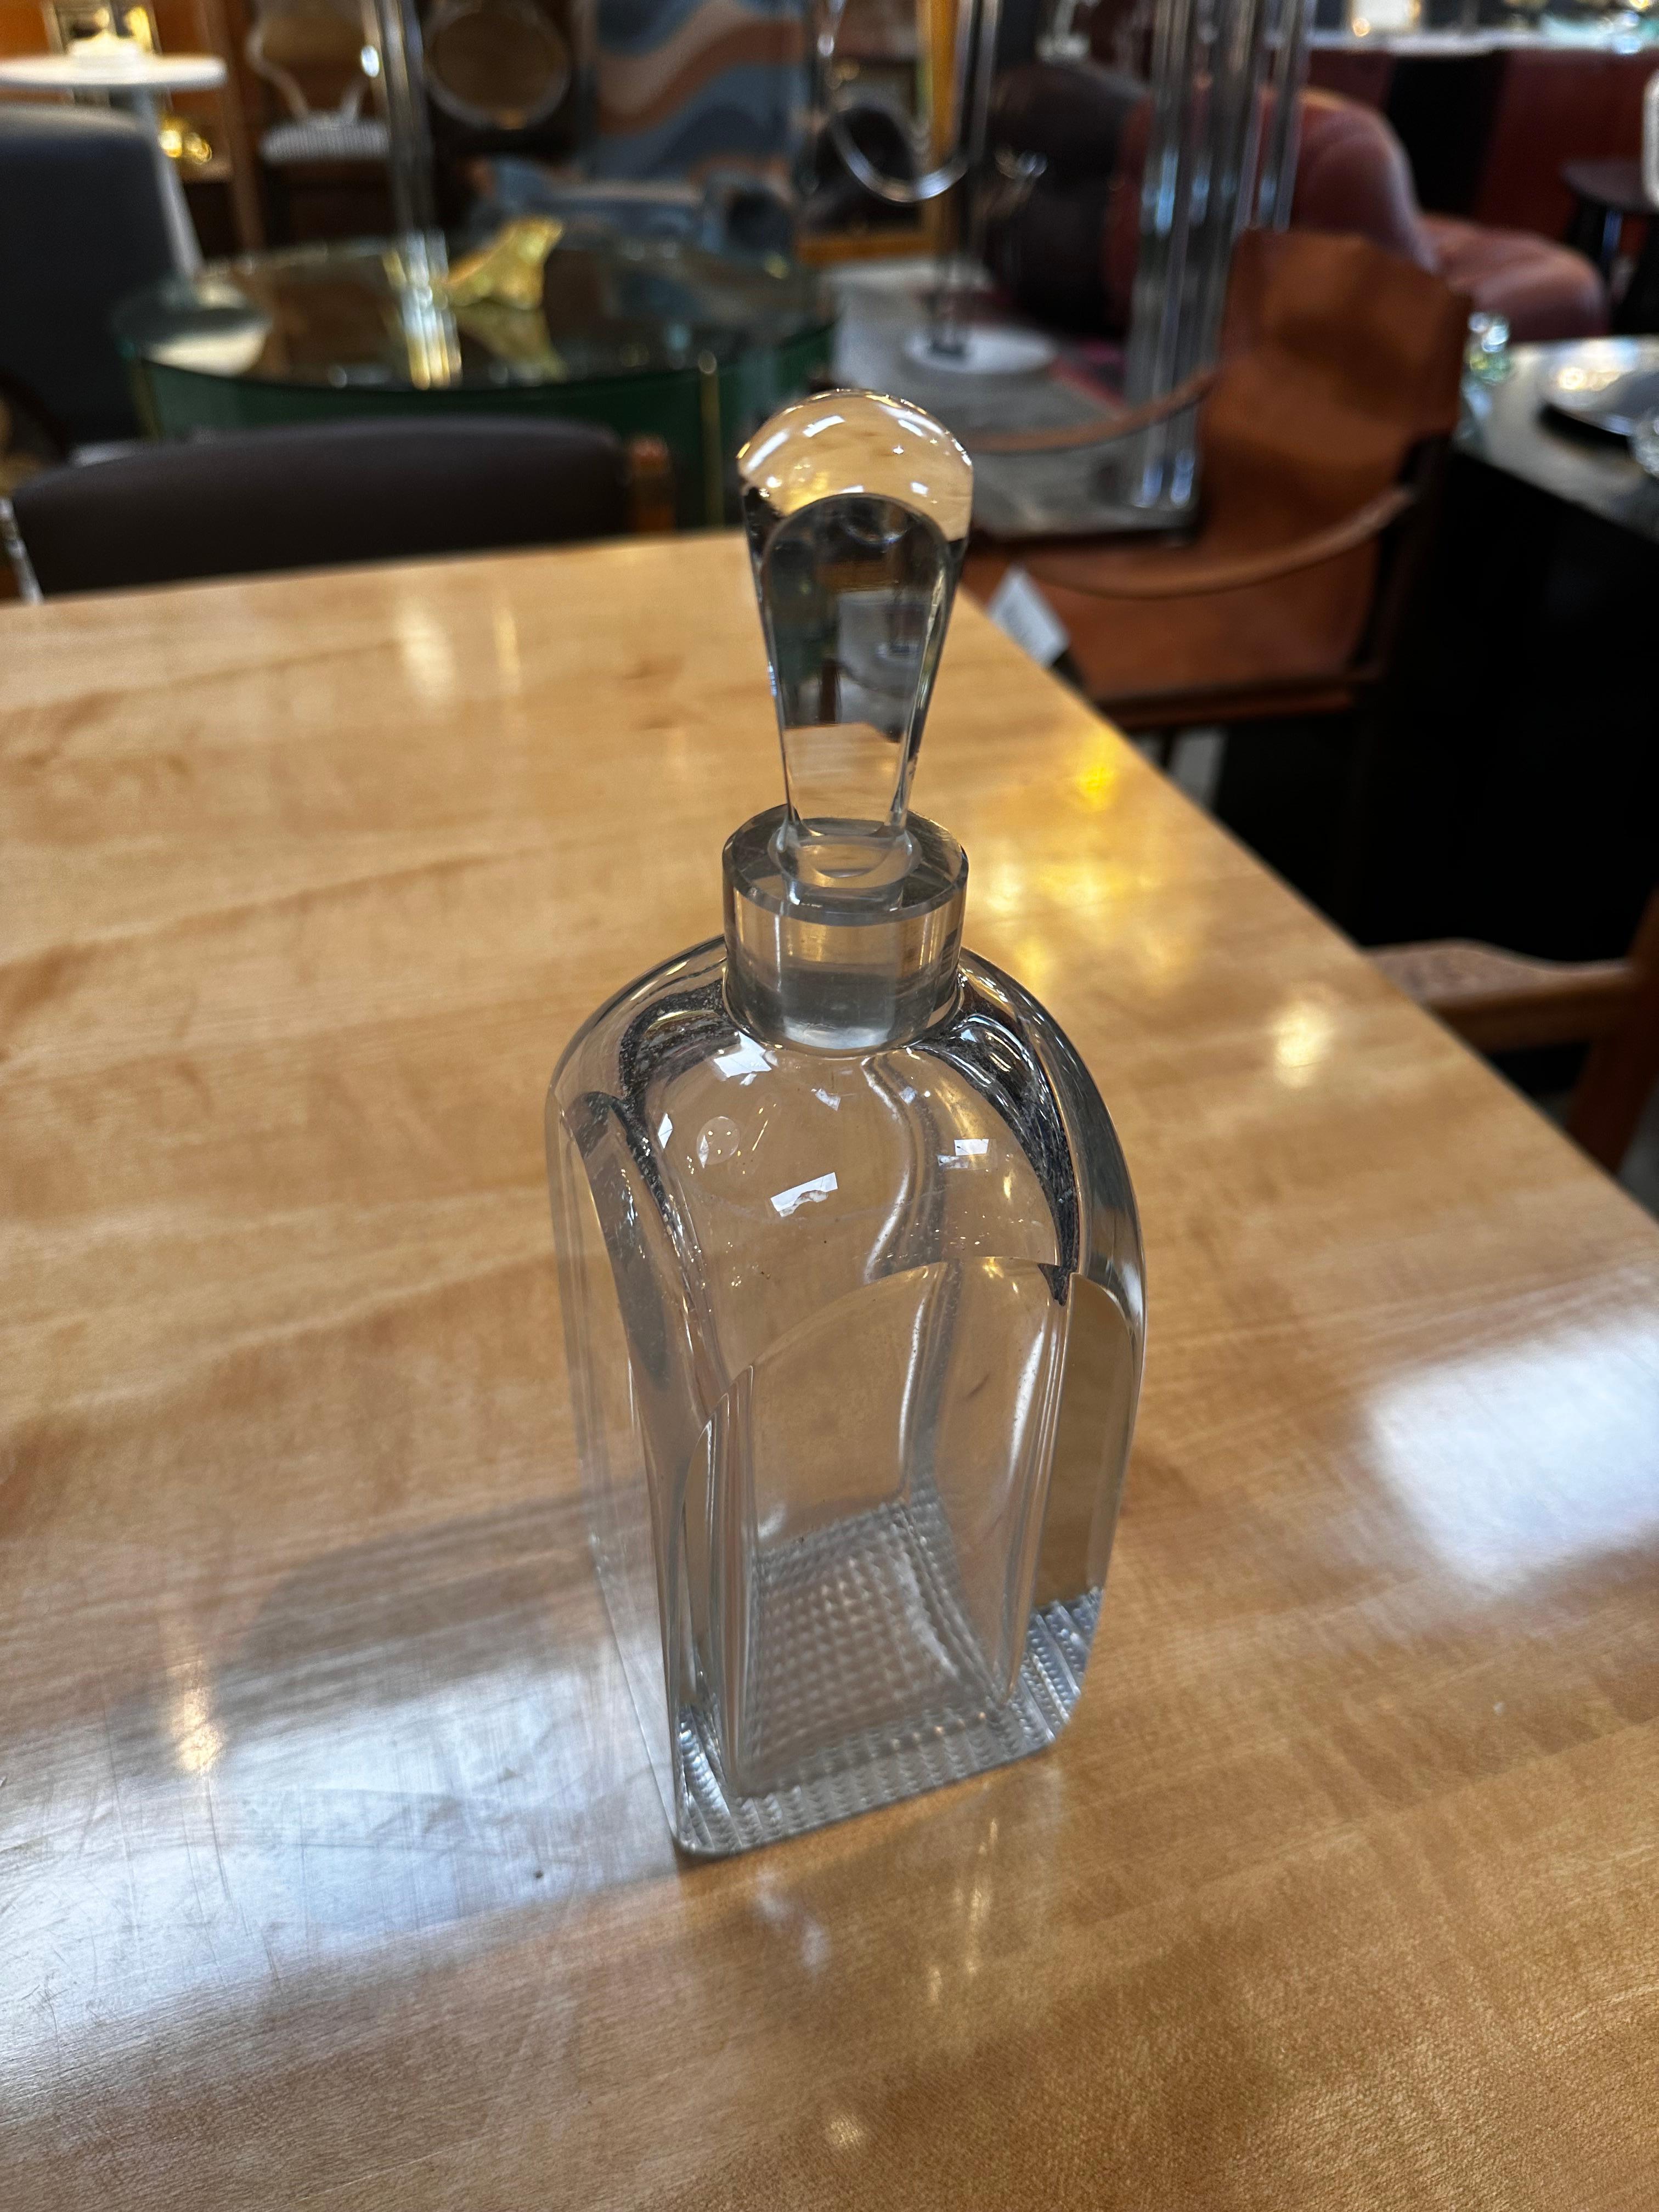 The Vintage Italian Decorative Crystal Decanter from the 1960s is a classic and refined piece of barware. Crafted in Italy during the mid-20th century, this decanter is made of high-quality crystal, showcasing both elegance and craftsmanship. Its